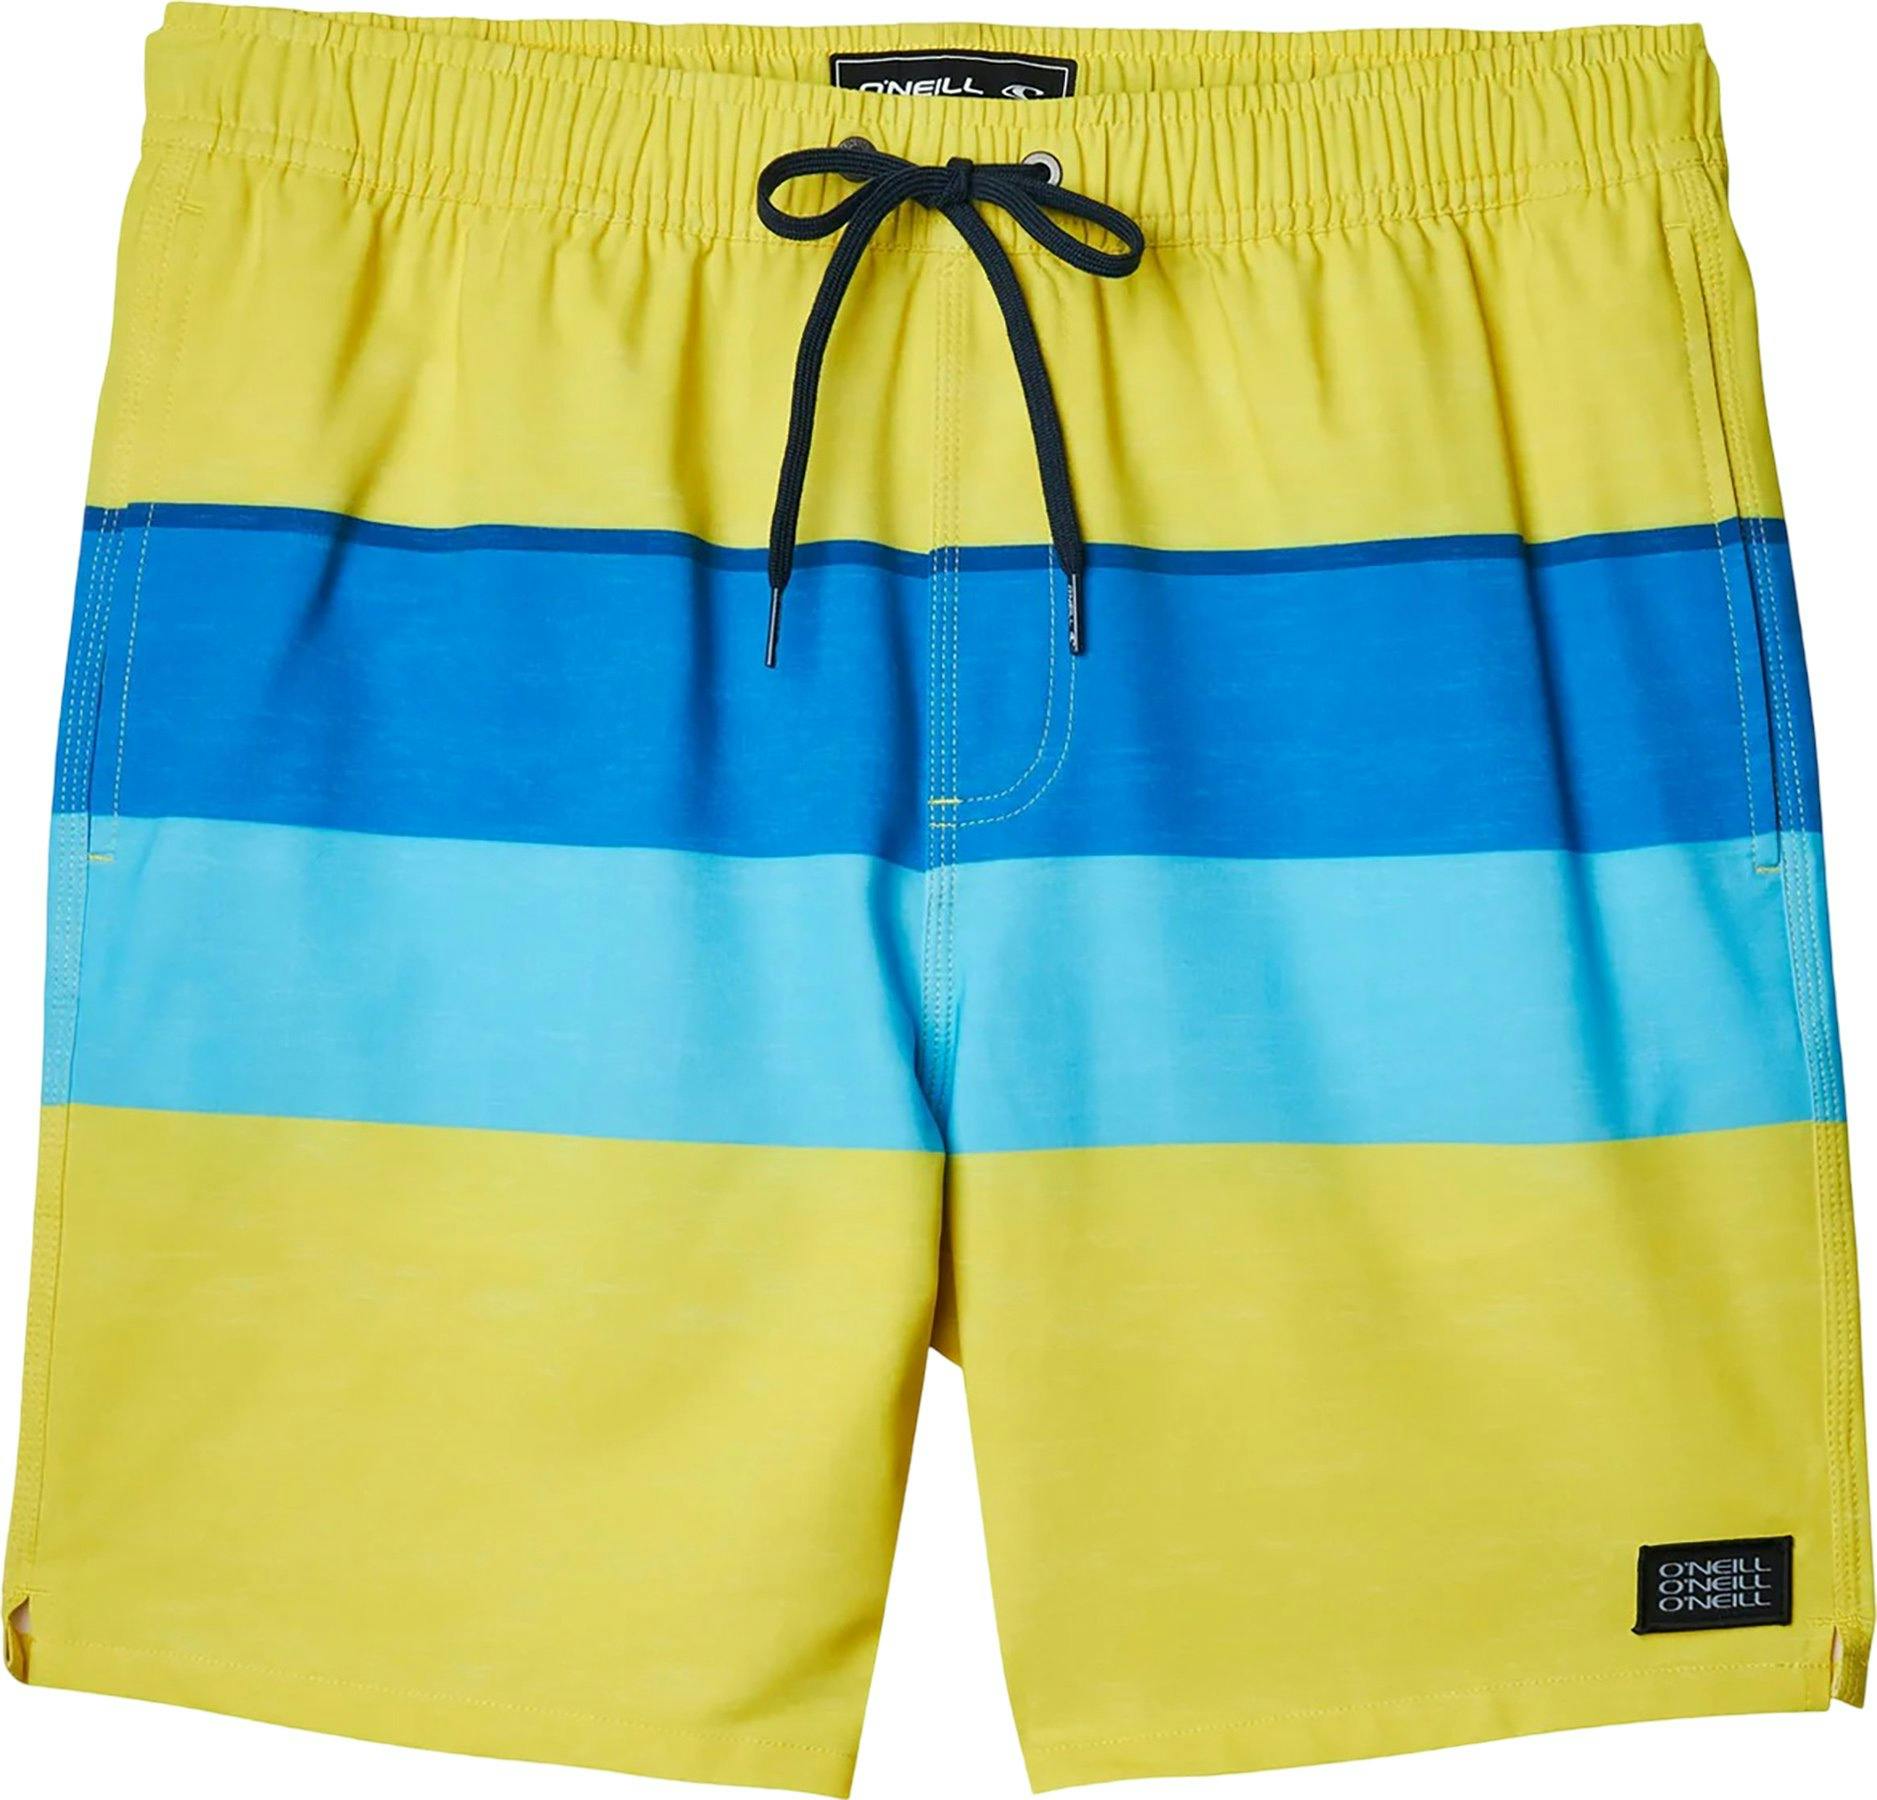 Product image for Hermosa Volley Boardshorts - Men's